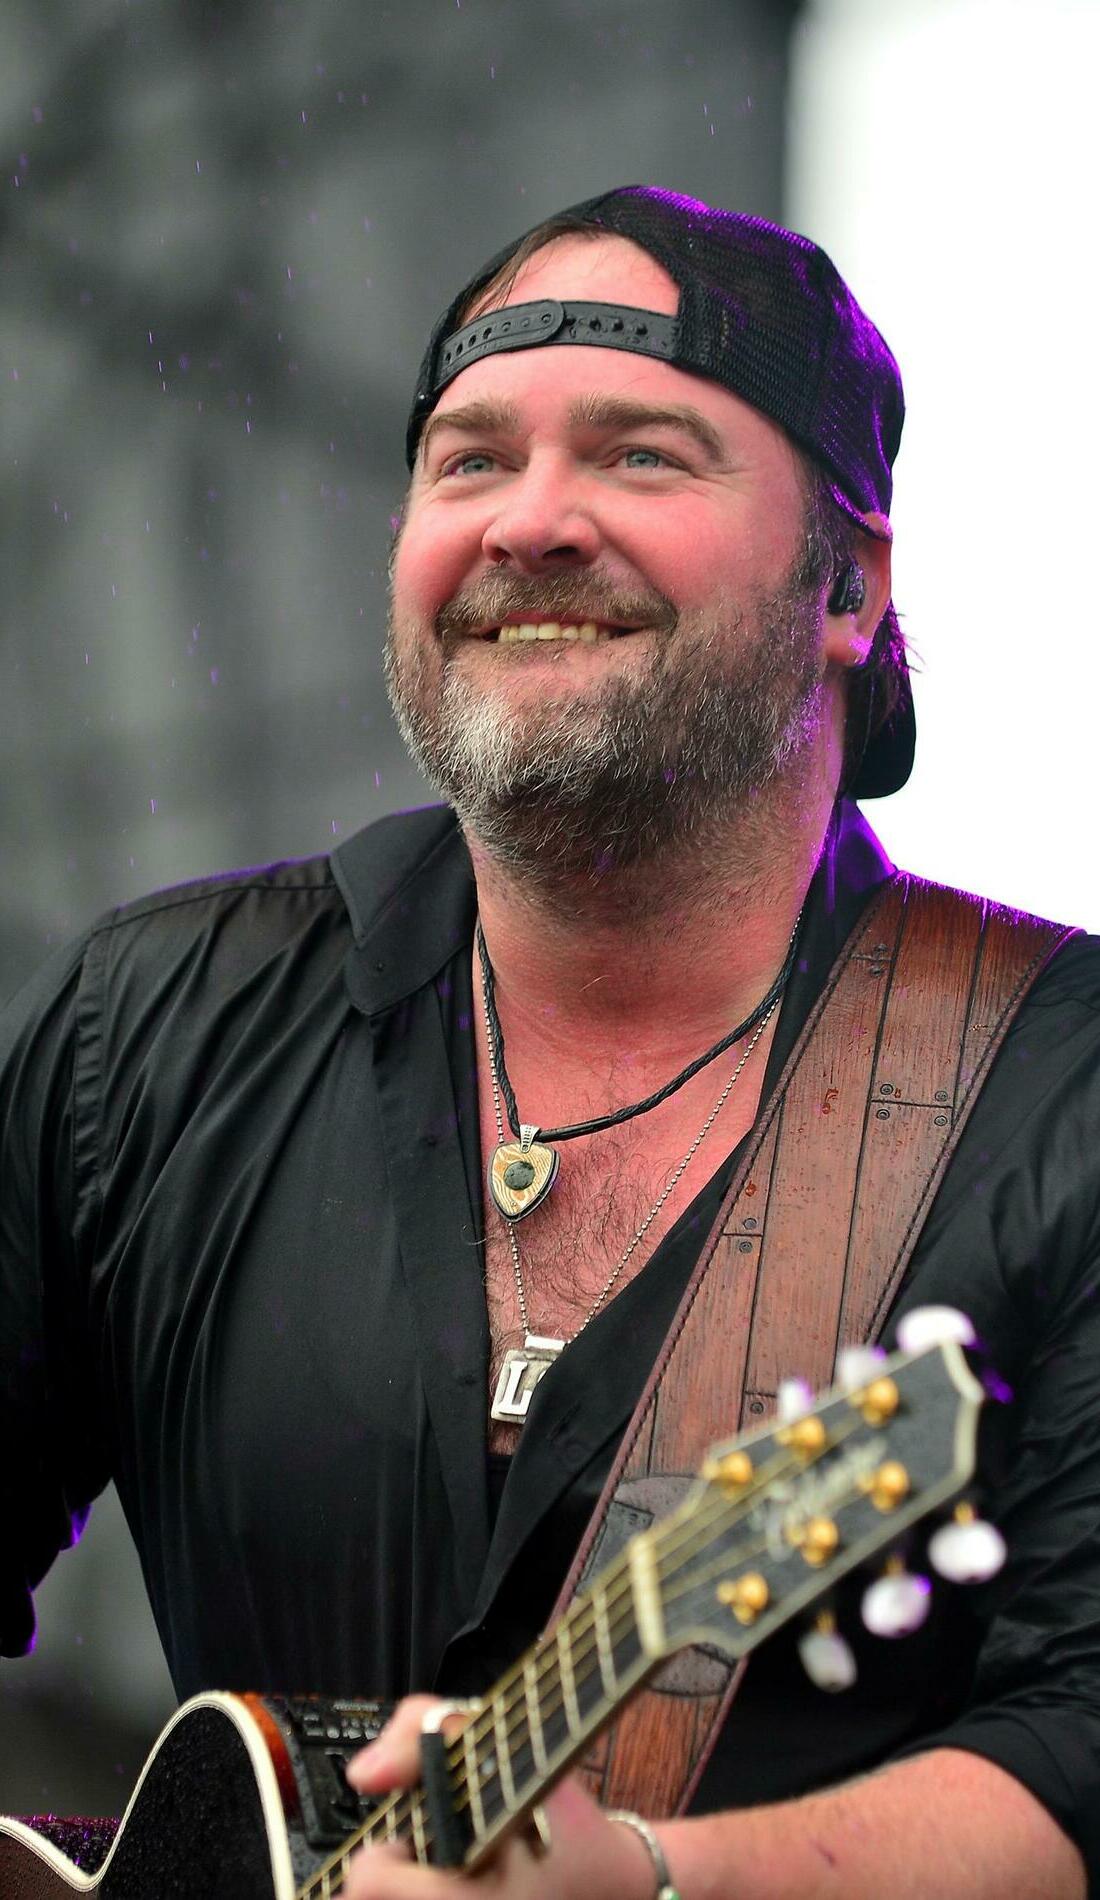 A Lee Brice live event